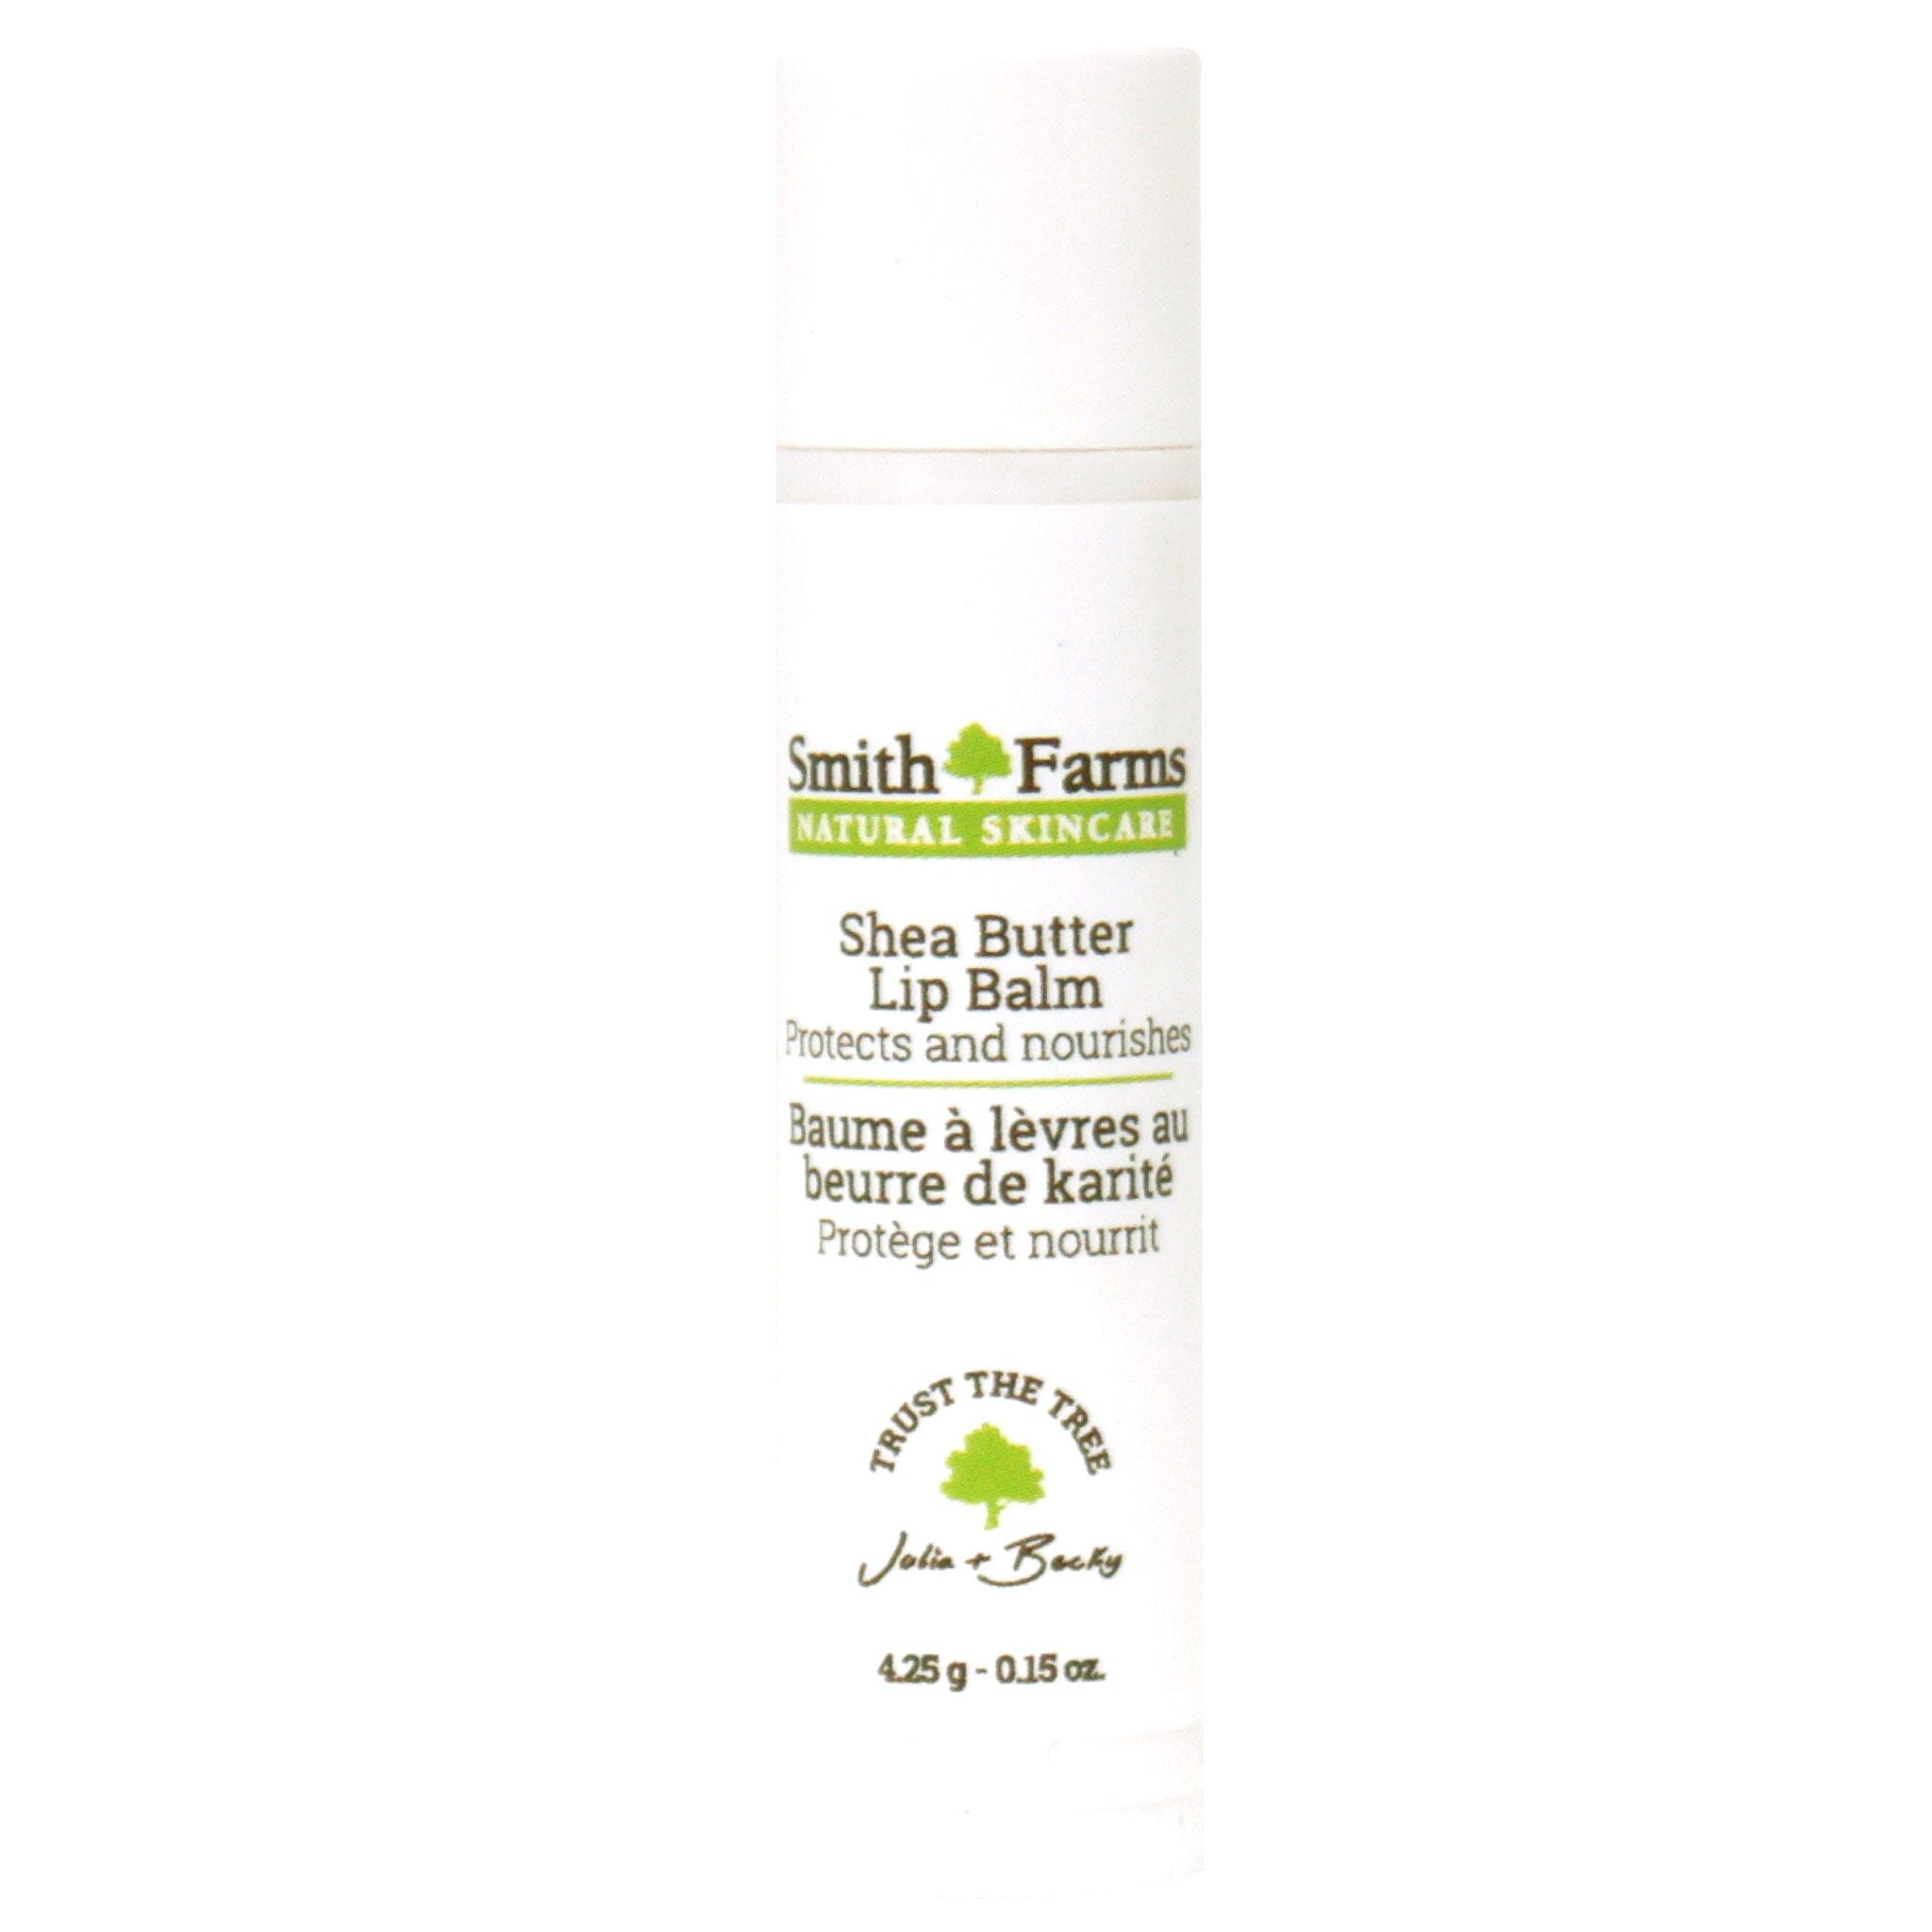 Shea Butter Lip Balm Lip Care, Our Products Smith Farms 